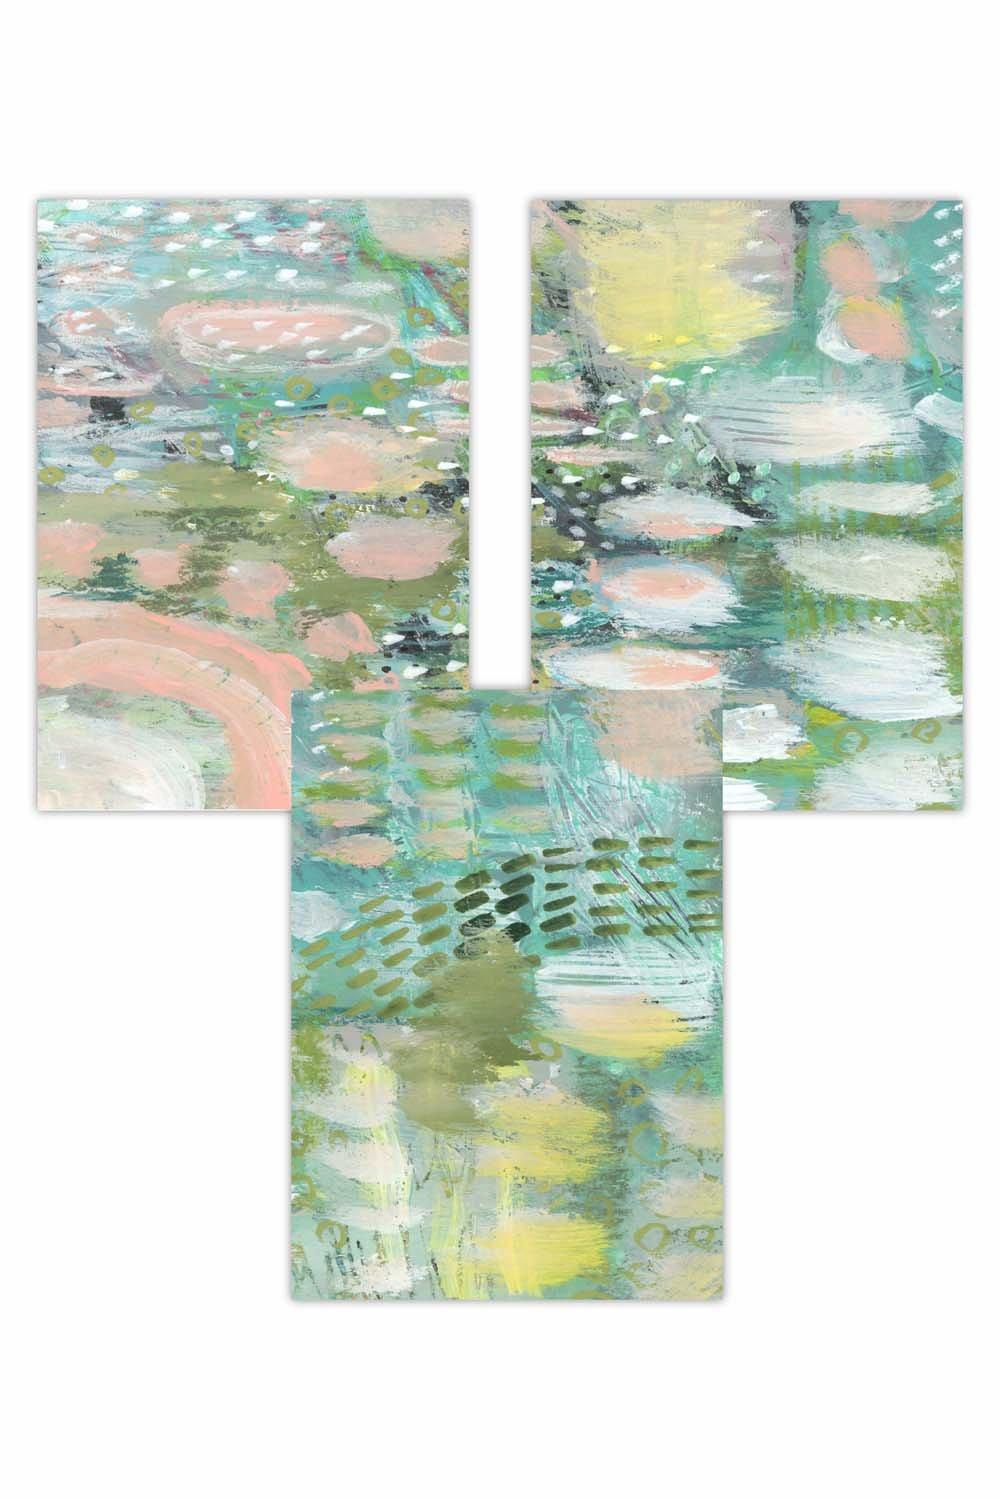 Set of 3 Abstract lily Pond in Green and Pink Art Posters